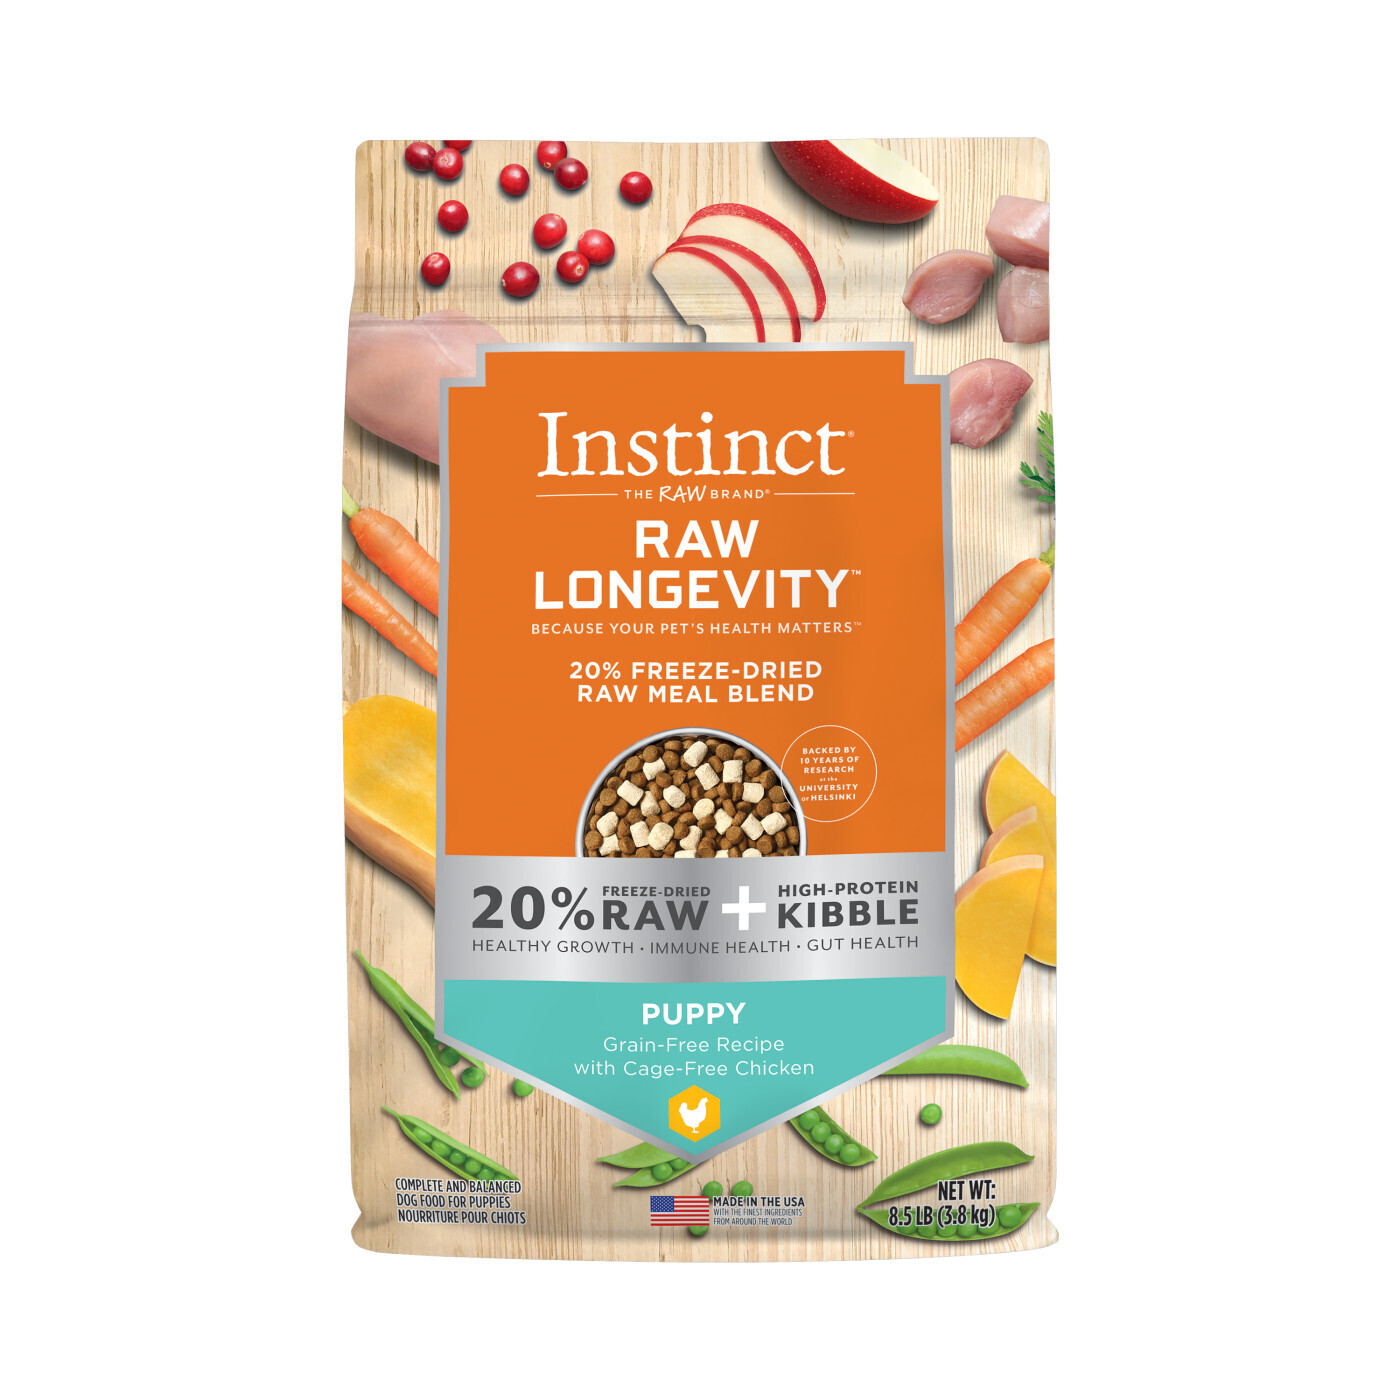 INSTINCT RAW LONGEVITY 20% FREEZE-DRIED RAW MEAL BLEND CAGE-FREE CHICKEN RECIPE FOR PUPPIES - ( BB 17 JUN 2023 )